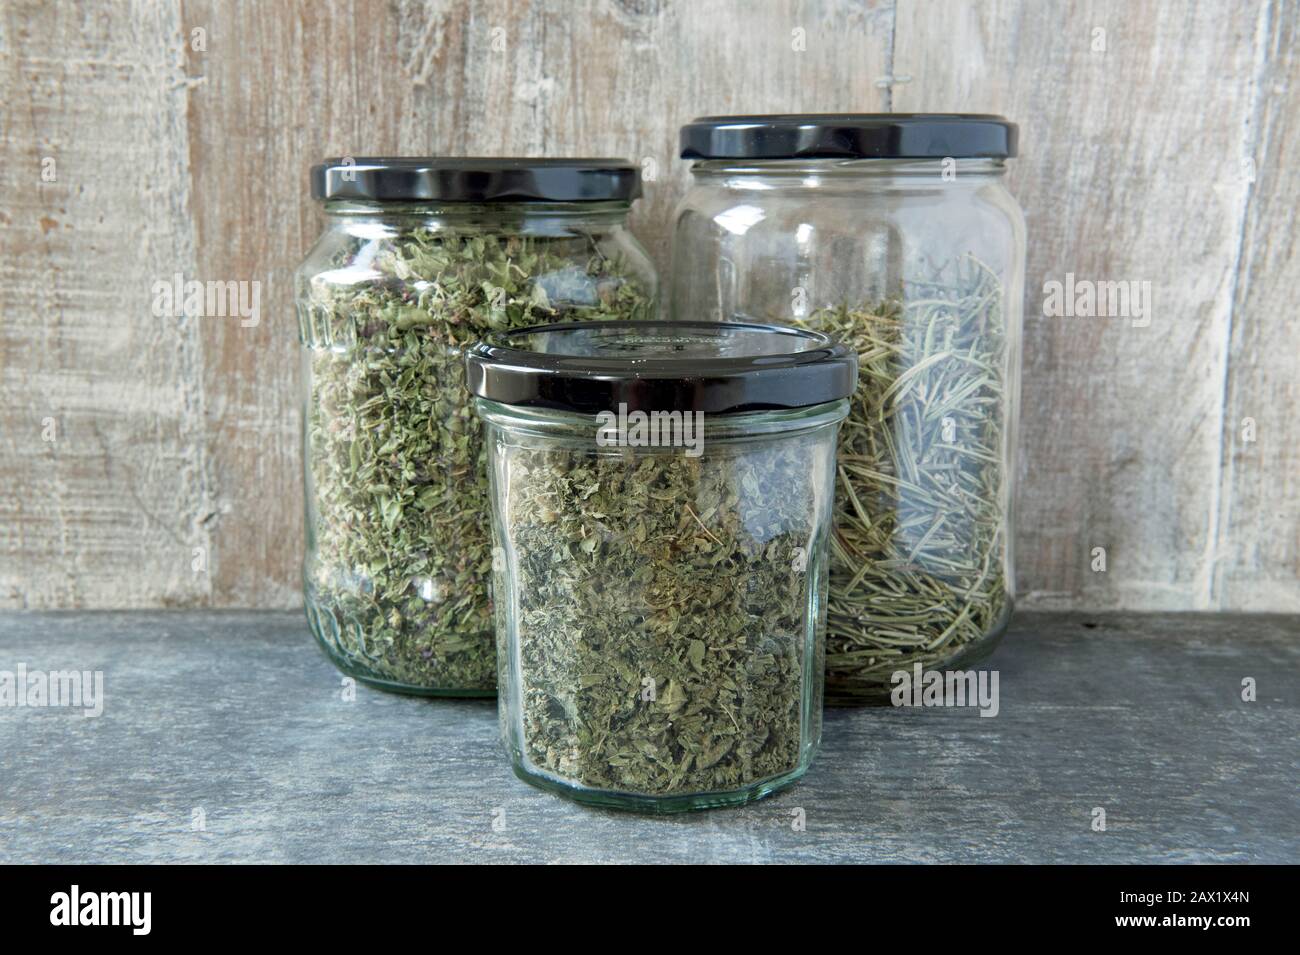 Old jars with black lids reused to store organic dried herbs against wooden background. Herb jars.  Zero waste concept. Stock Photo